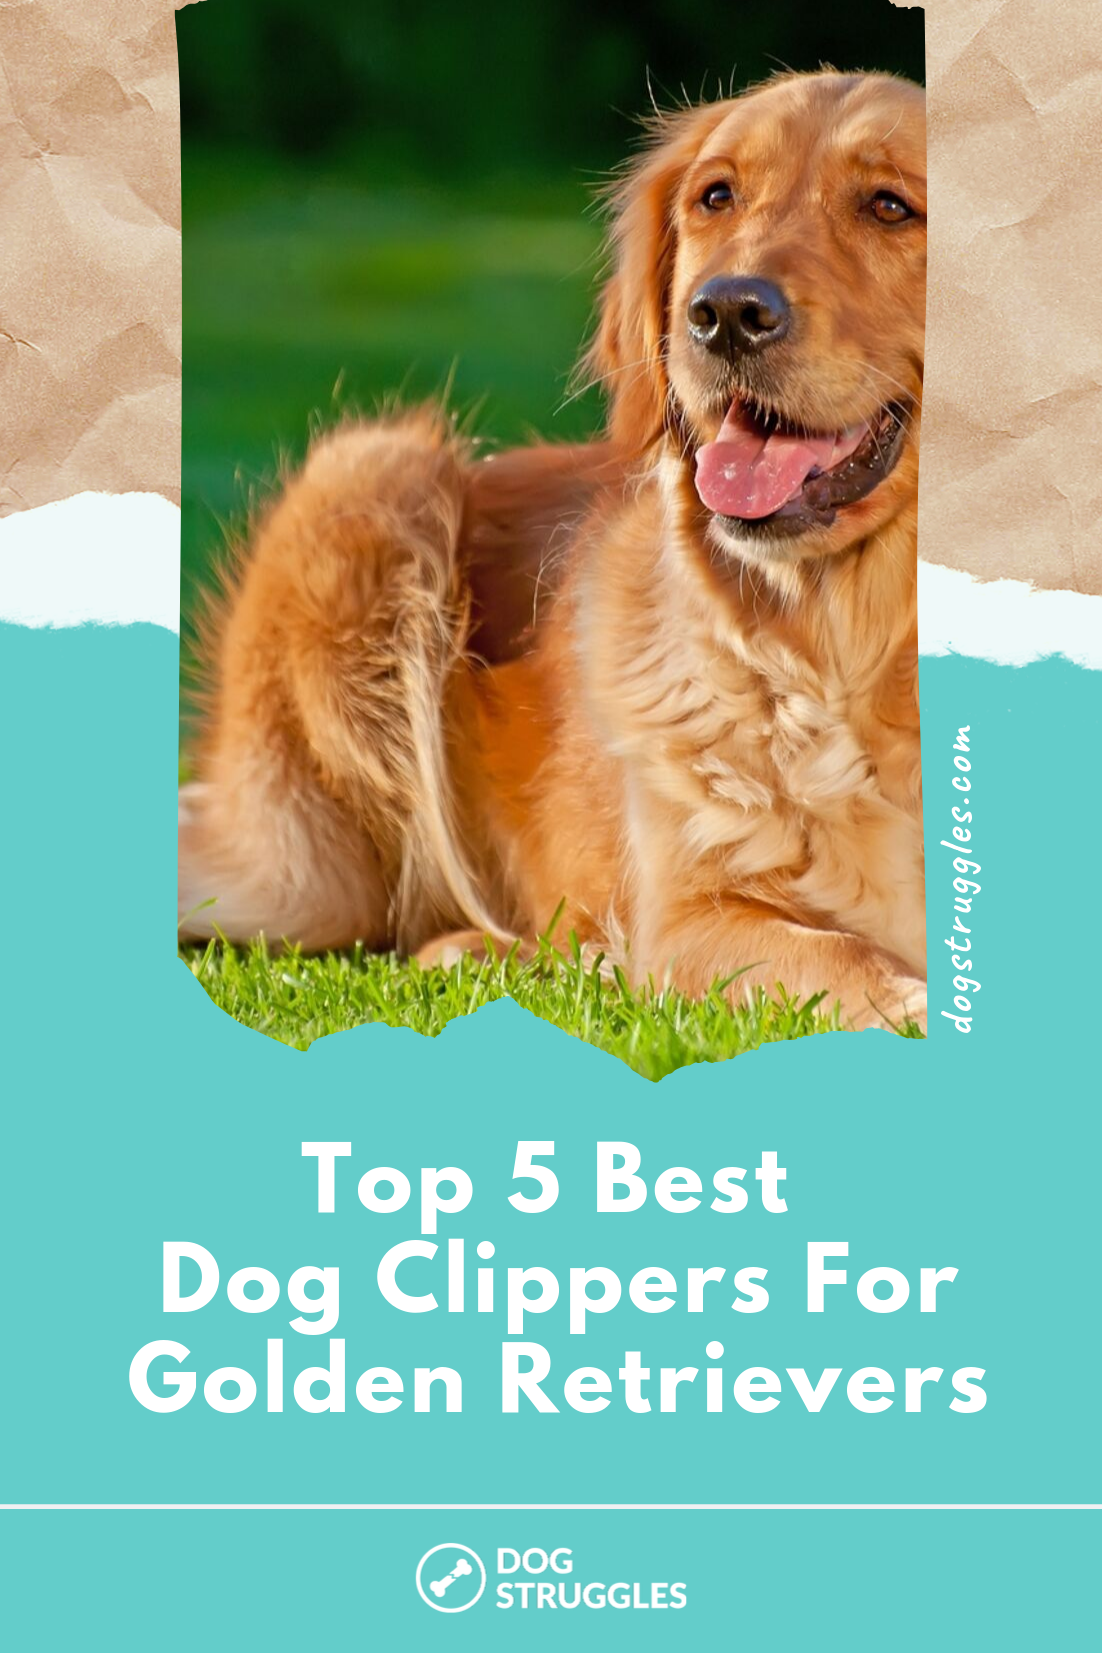 Top 5 Best Dog Clippers For Golden Retrievers